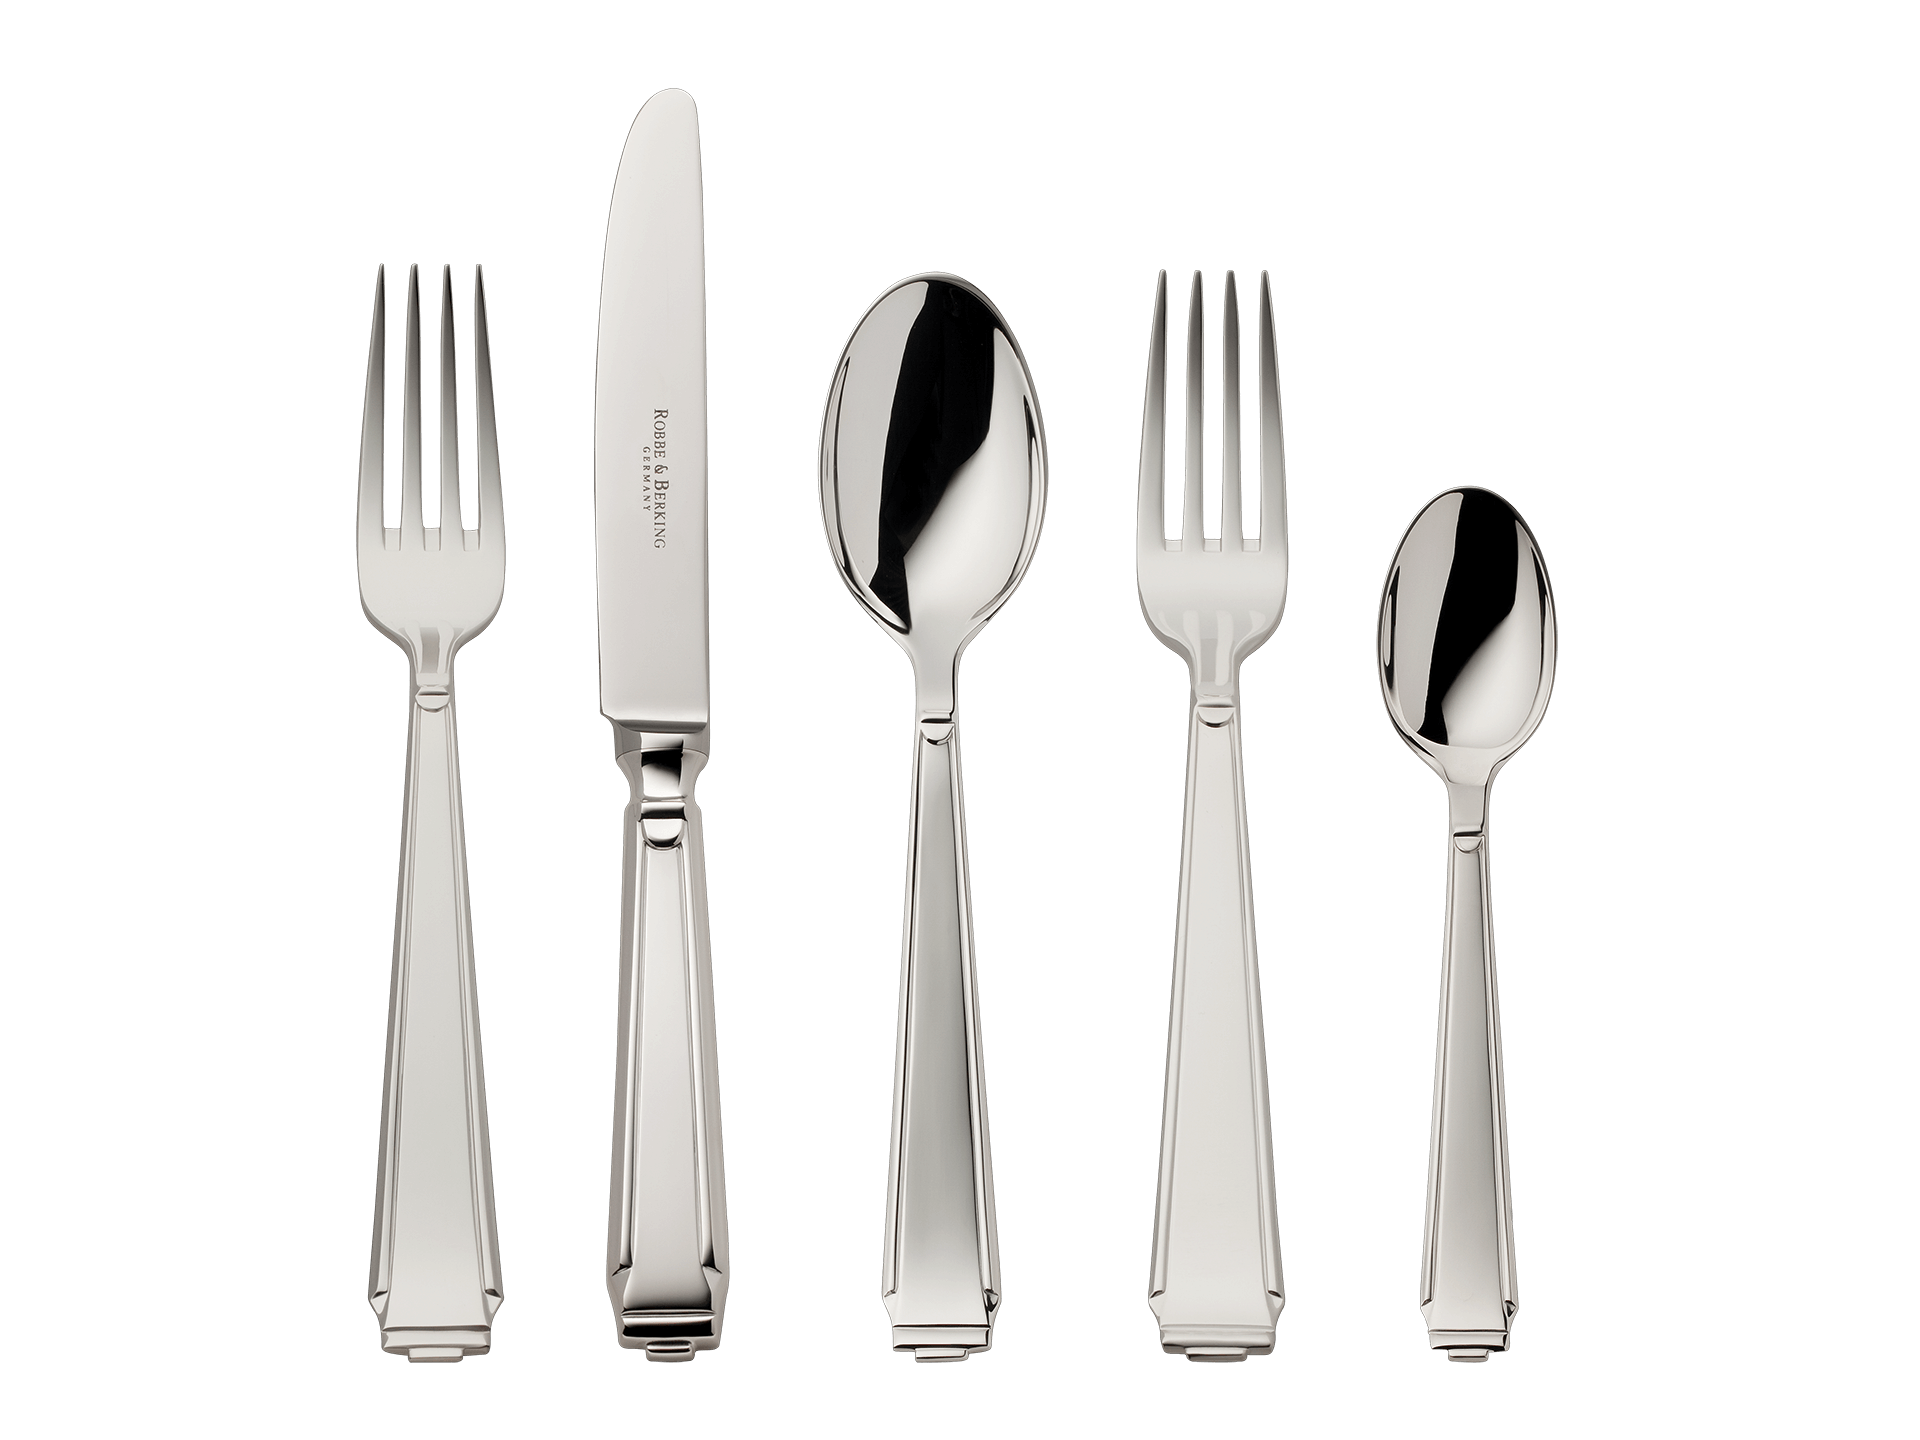 Art Deco 5-piece place setting (150g massive silverplated)